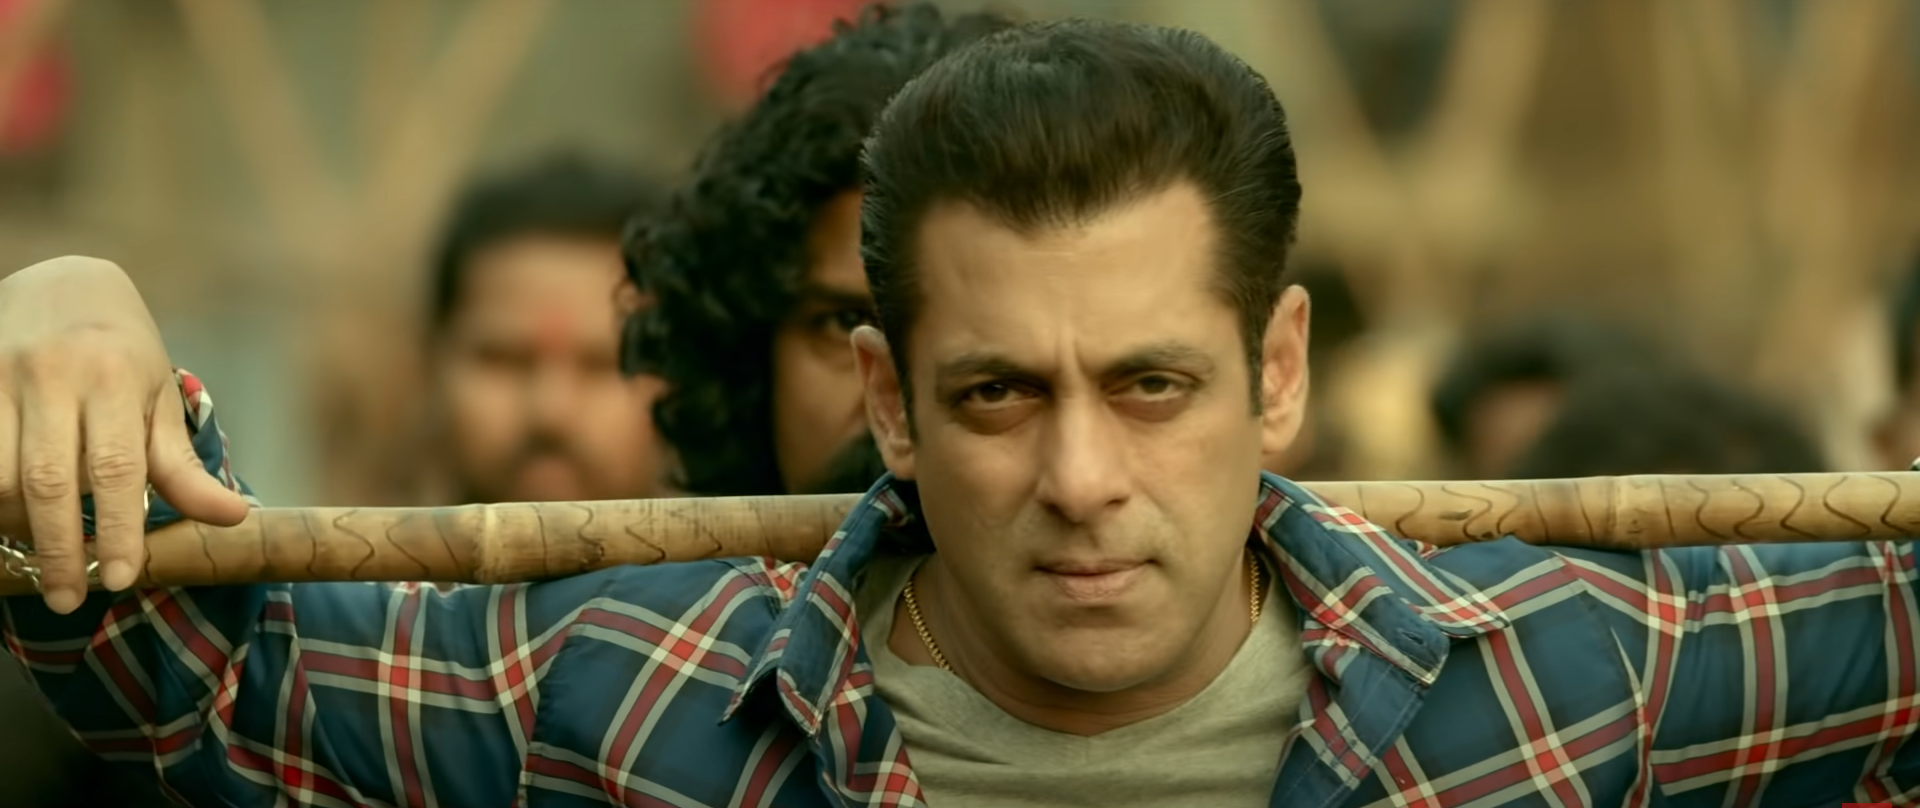 Salman Khan holding a stick over his shoulders with a determined look on his face